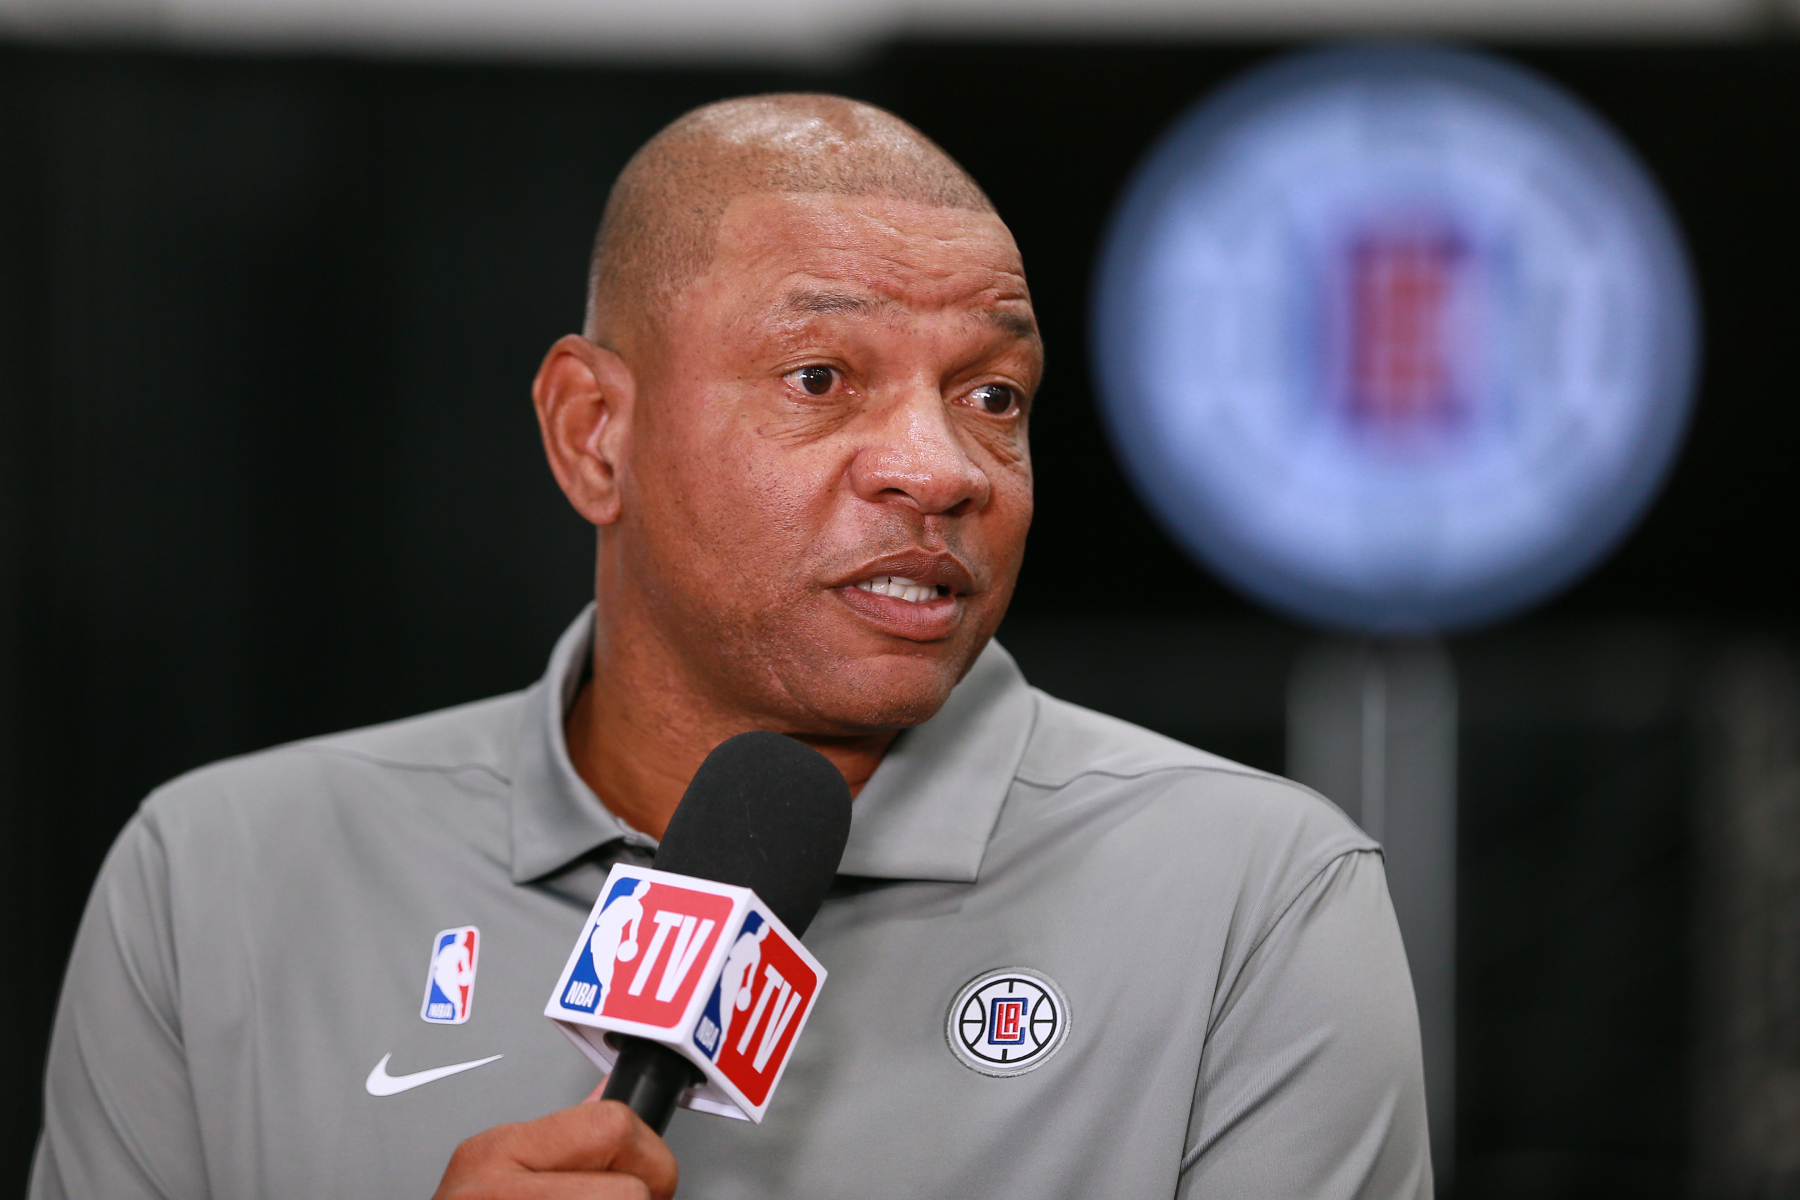 Doc Rivers is one of the greatest coaches in the NBA today and the Clippers are one of the best teams. However, why is he called "Doc"?